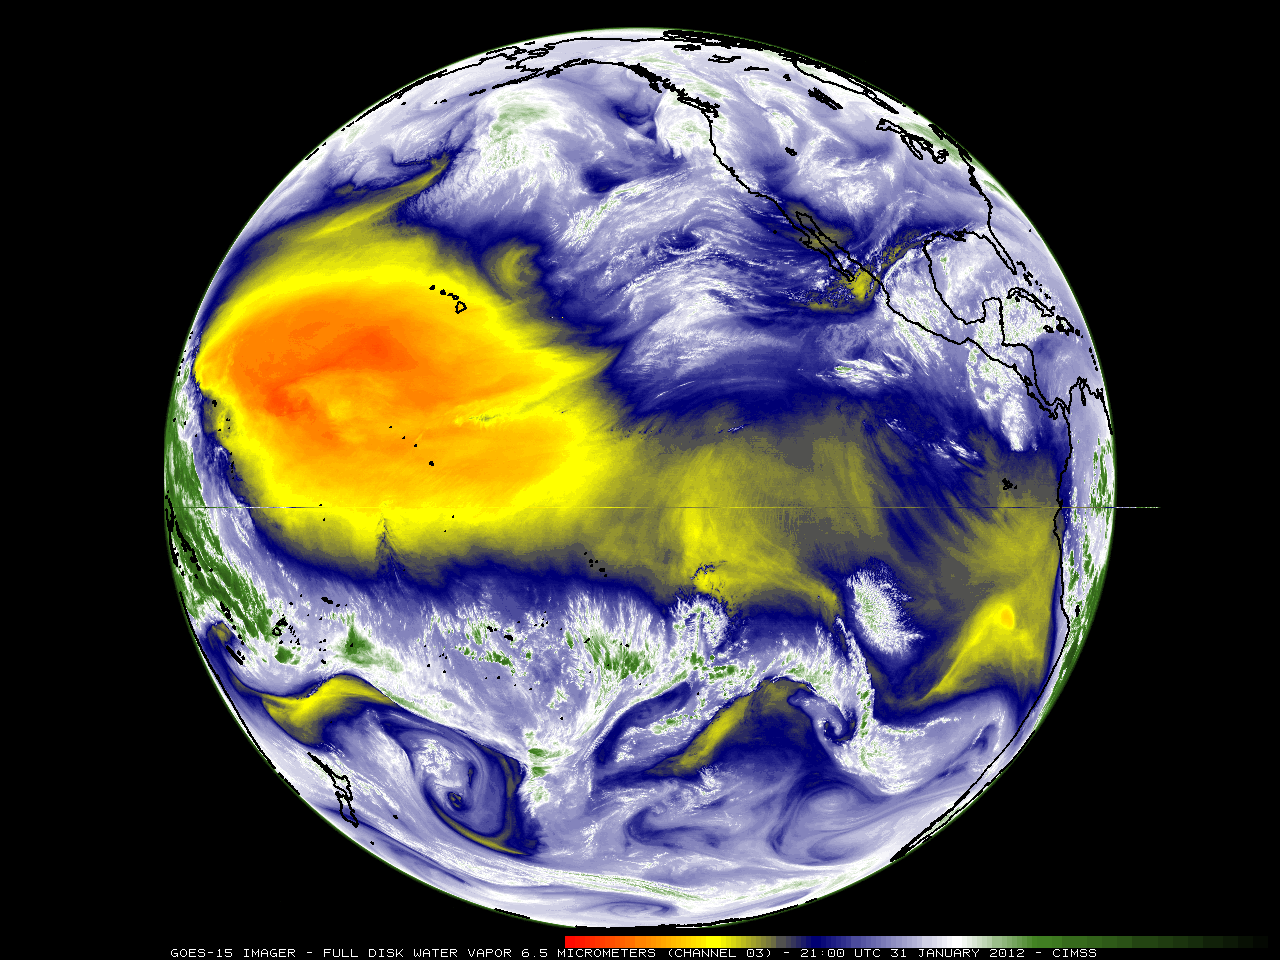 GOES-15 full disk 6.5 Âµm water vapor channel images (click image to play animation)